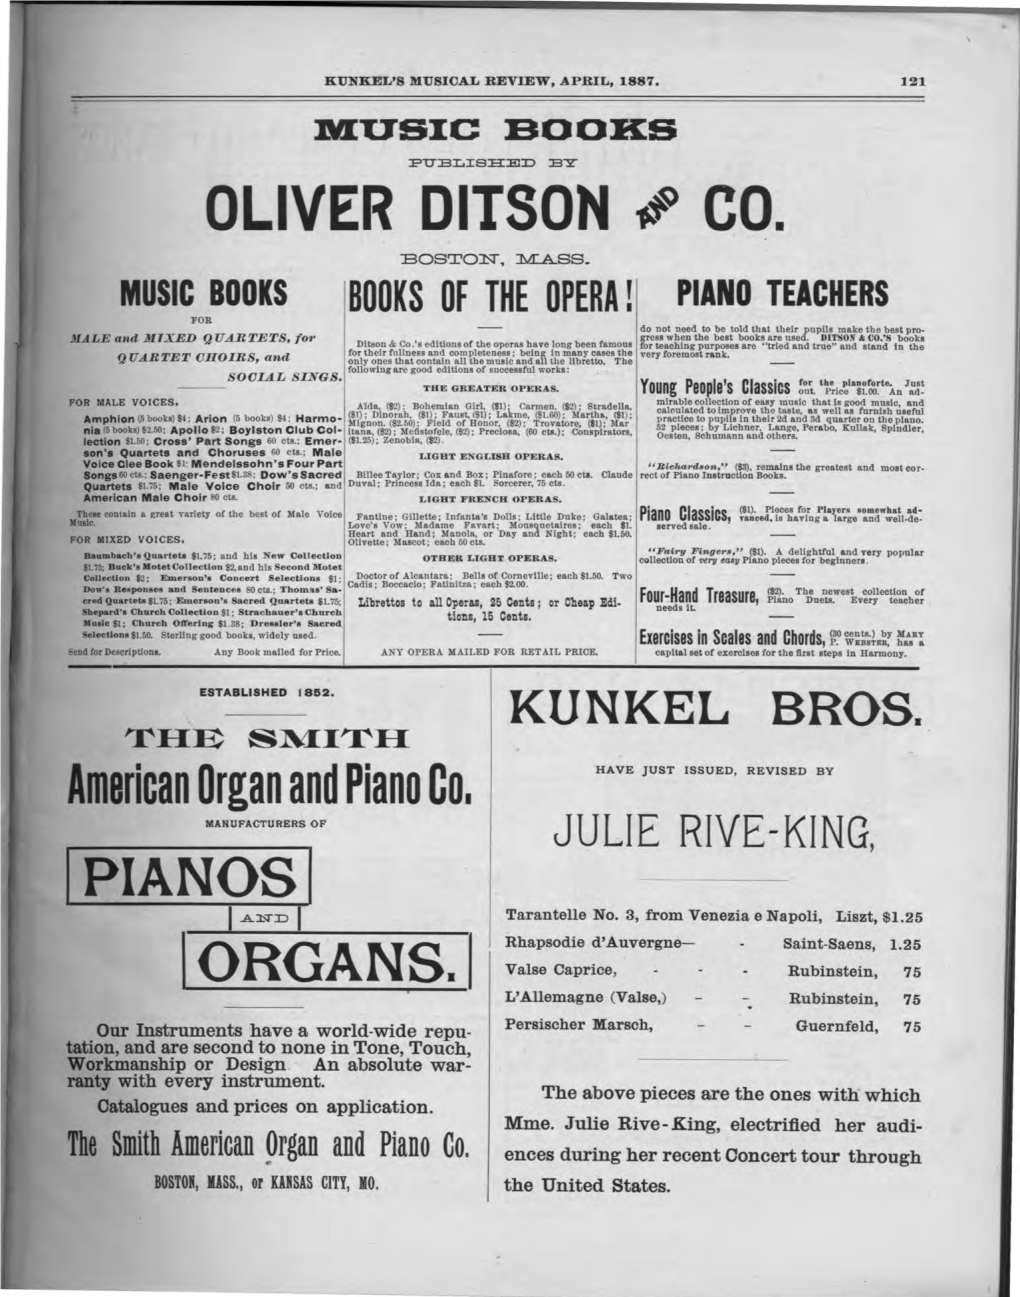 OLIVER DITSON Co